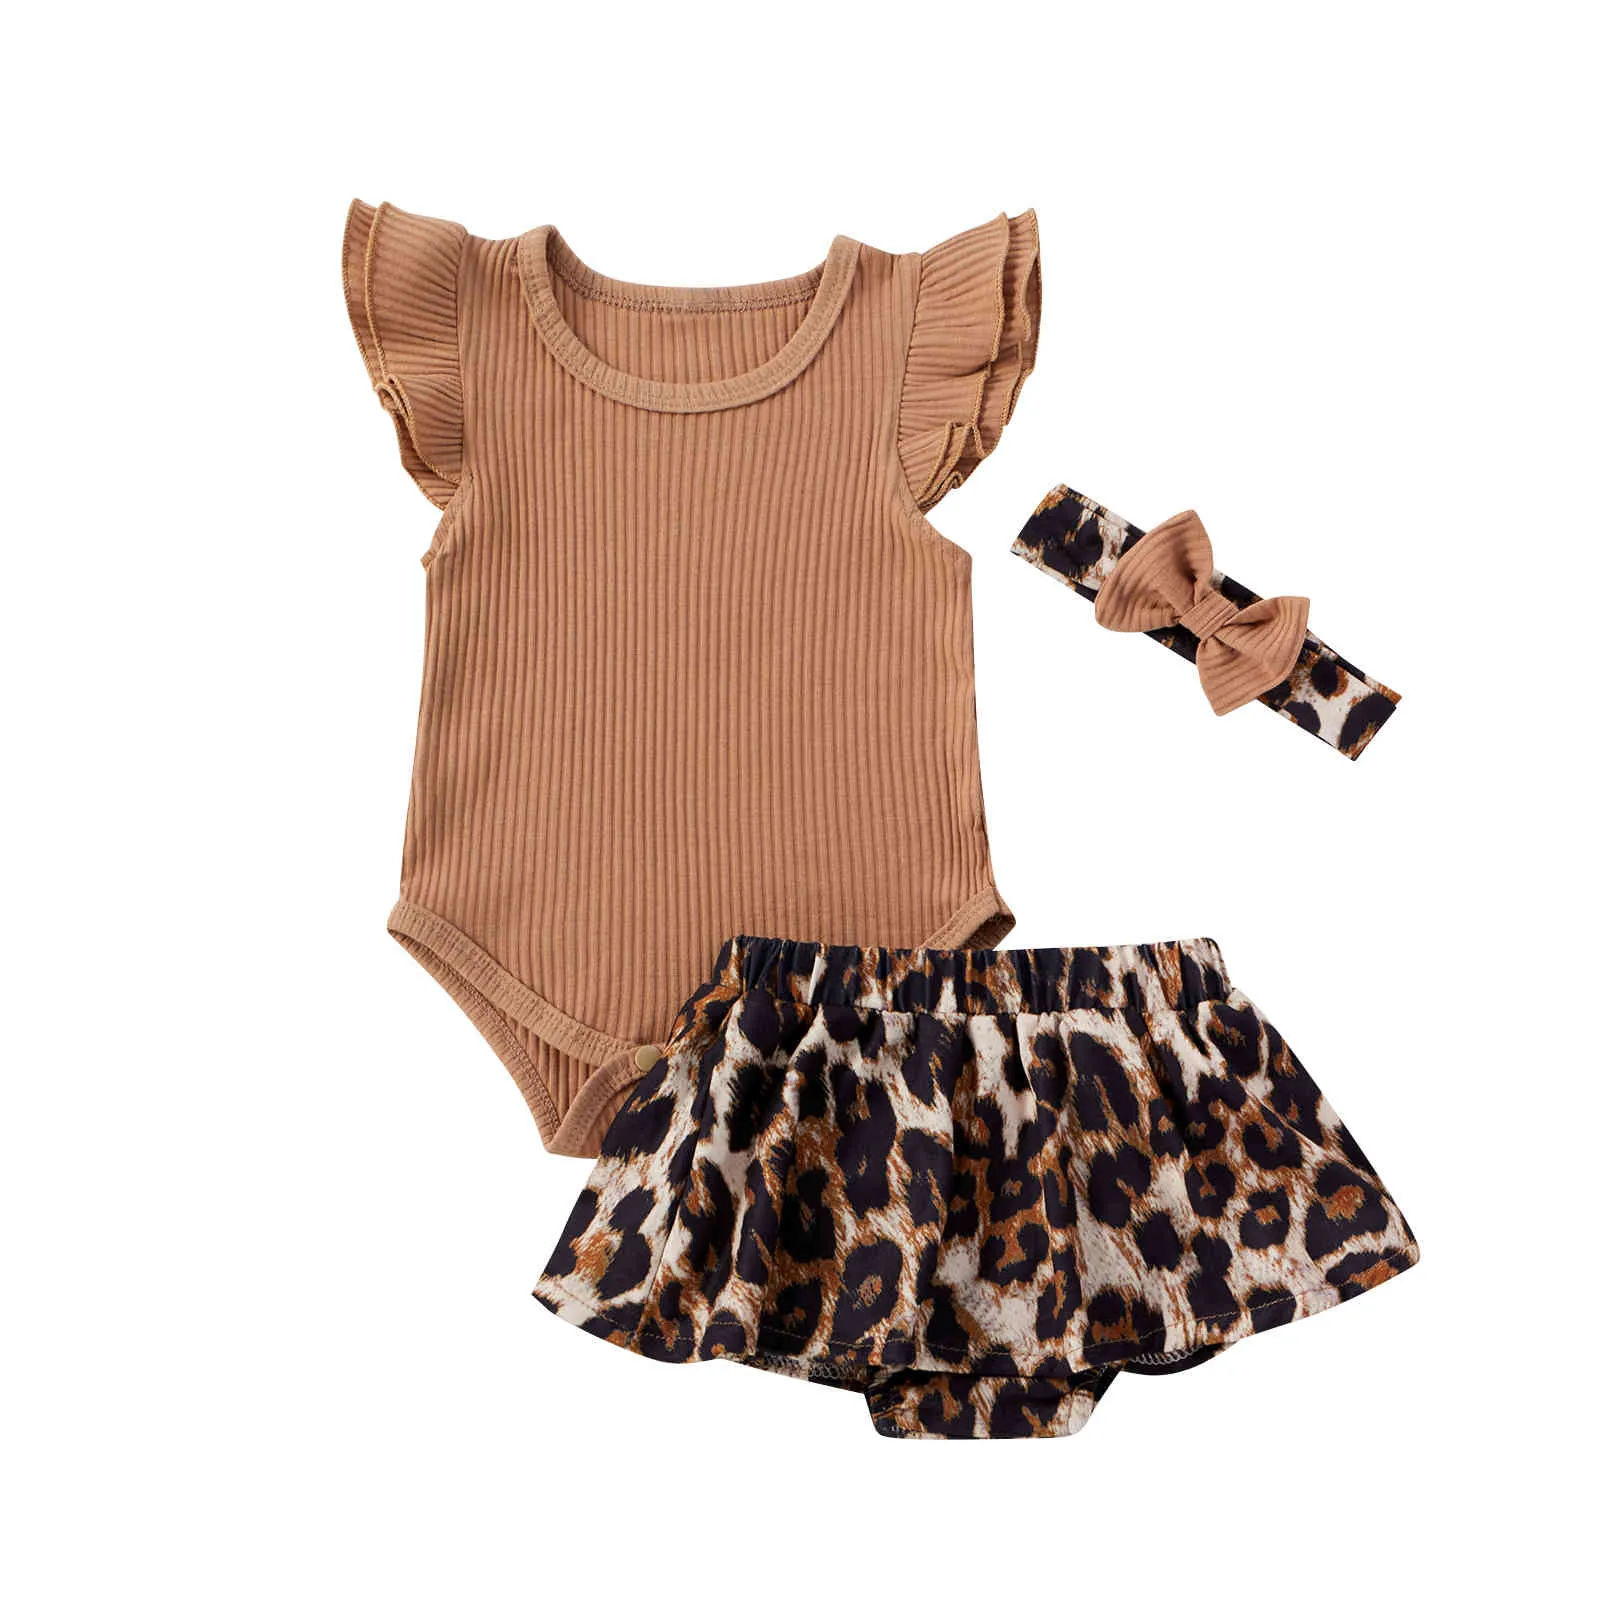 0-18M Summer Infant born Baby Girl Clothes Set Knitted Romper Ruffles Leopard Skirts Outfits Costumes 210515